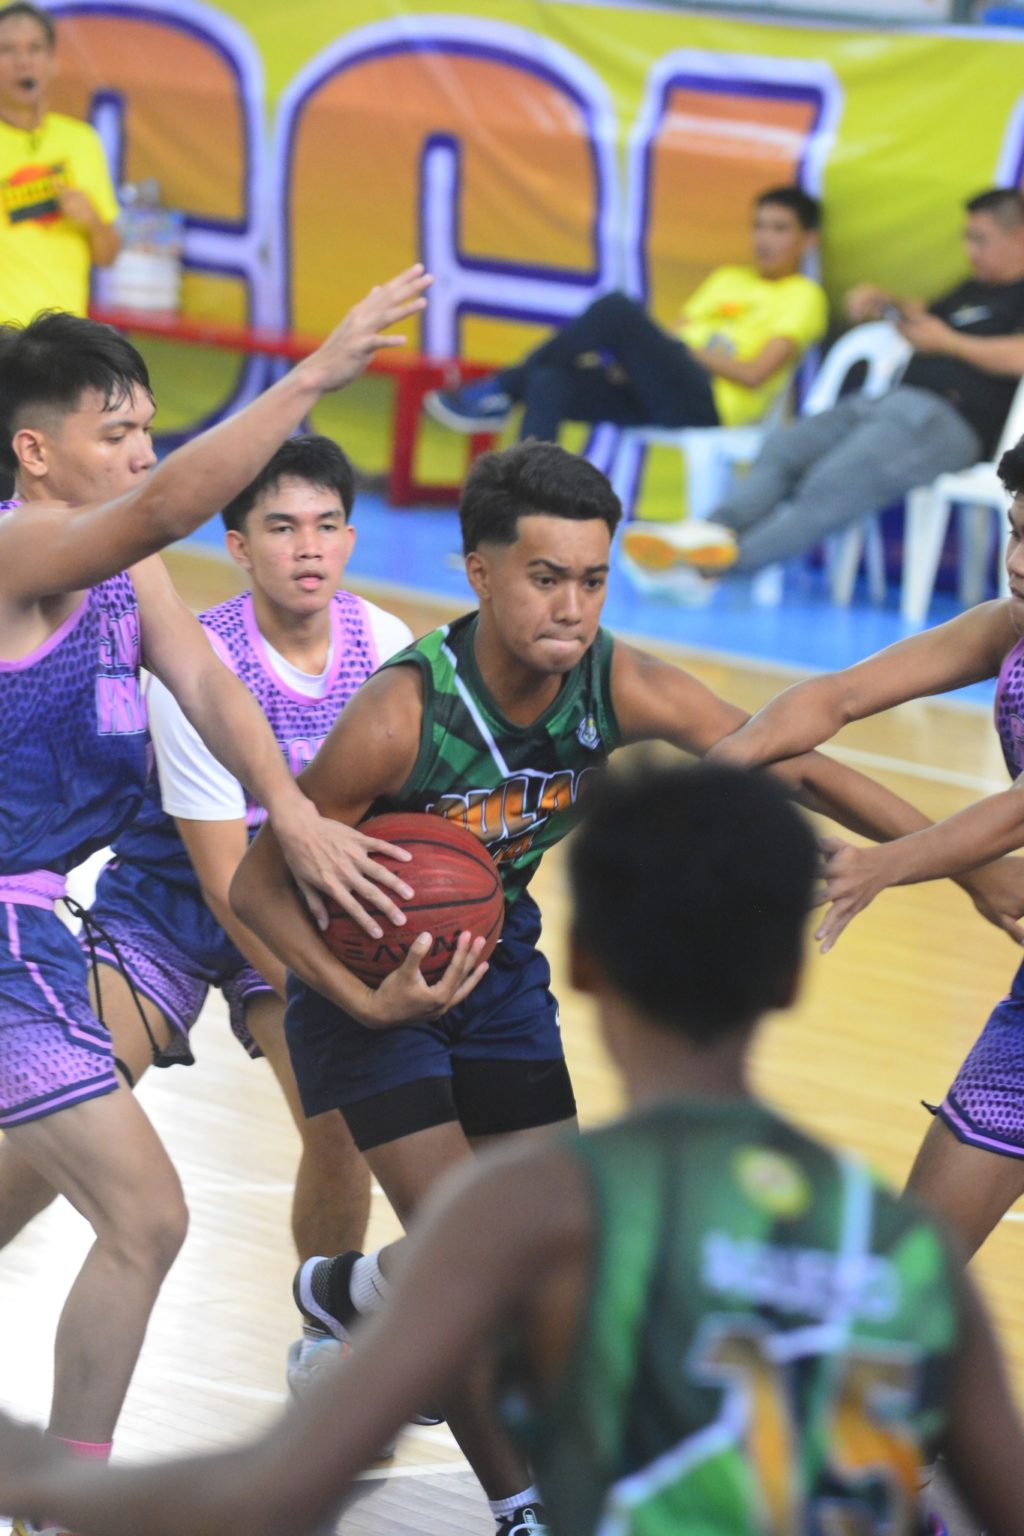 This is one of the basketball matches played during the OCCCI D-League Inter-School Basketball Tournament Northern Leyte leg in Jaro earlier this month. | Photo from OCCCI D-League Facebook page